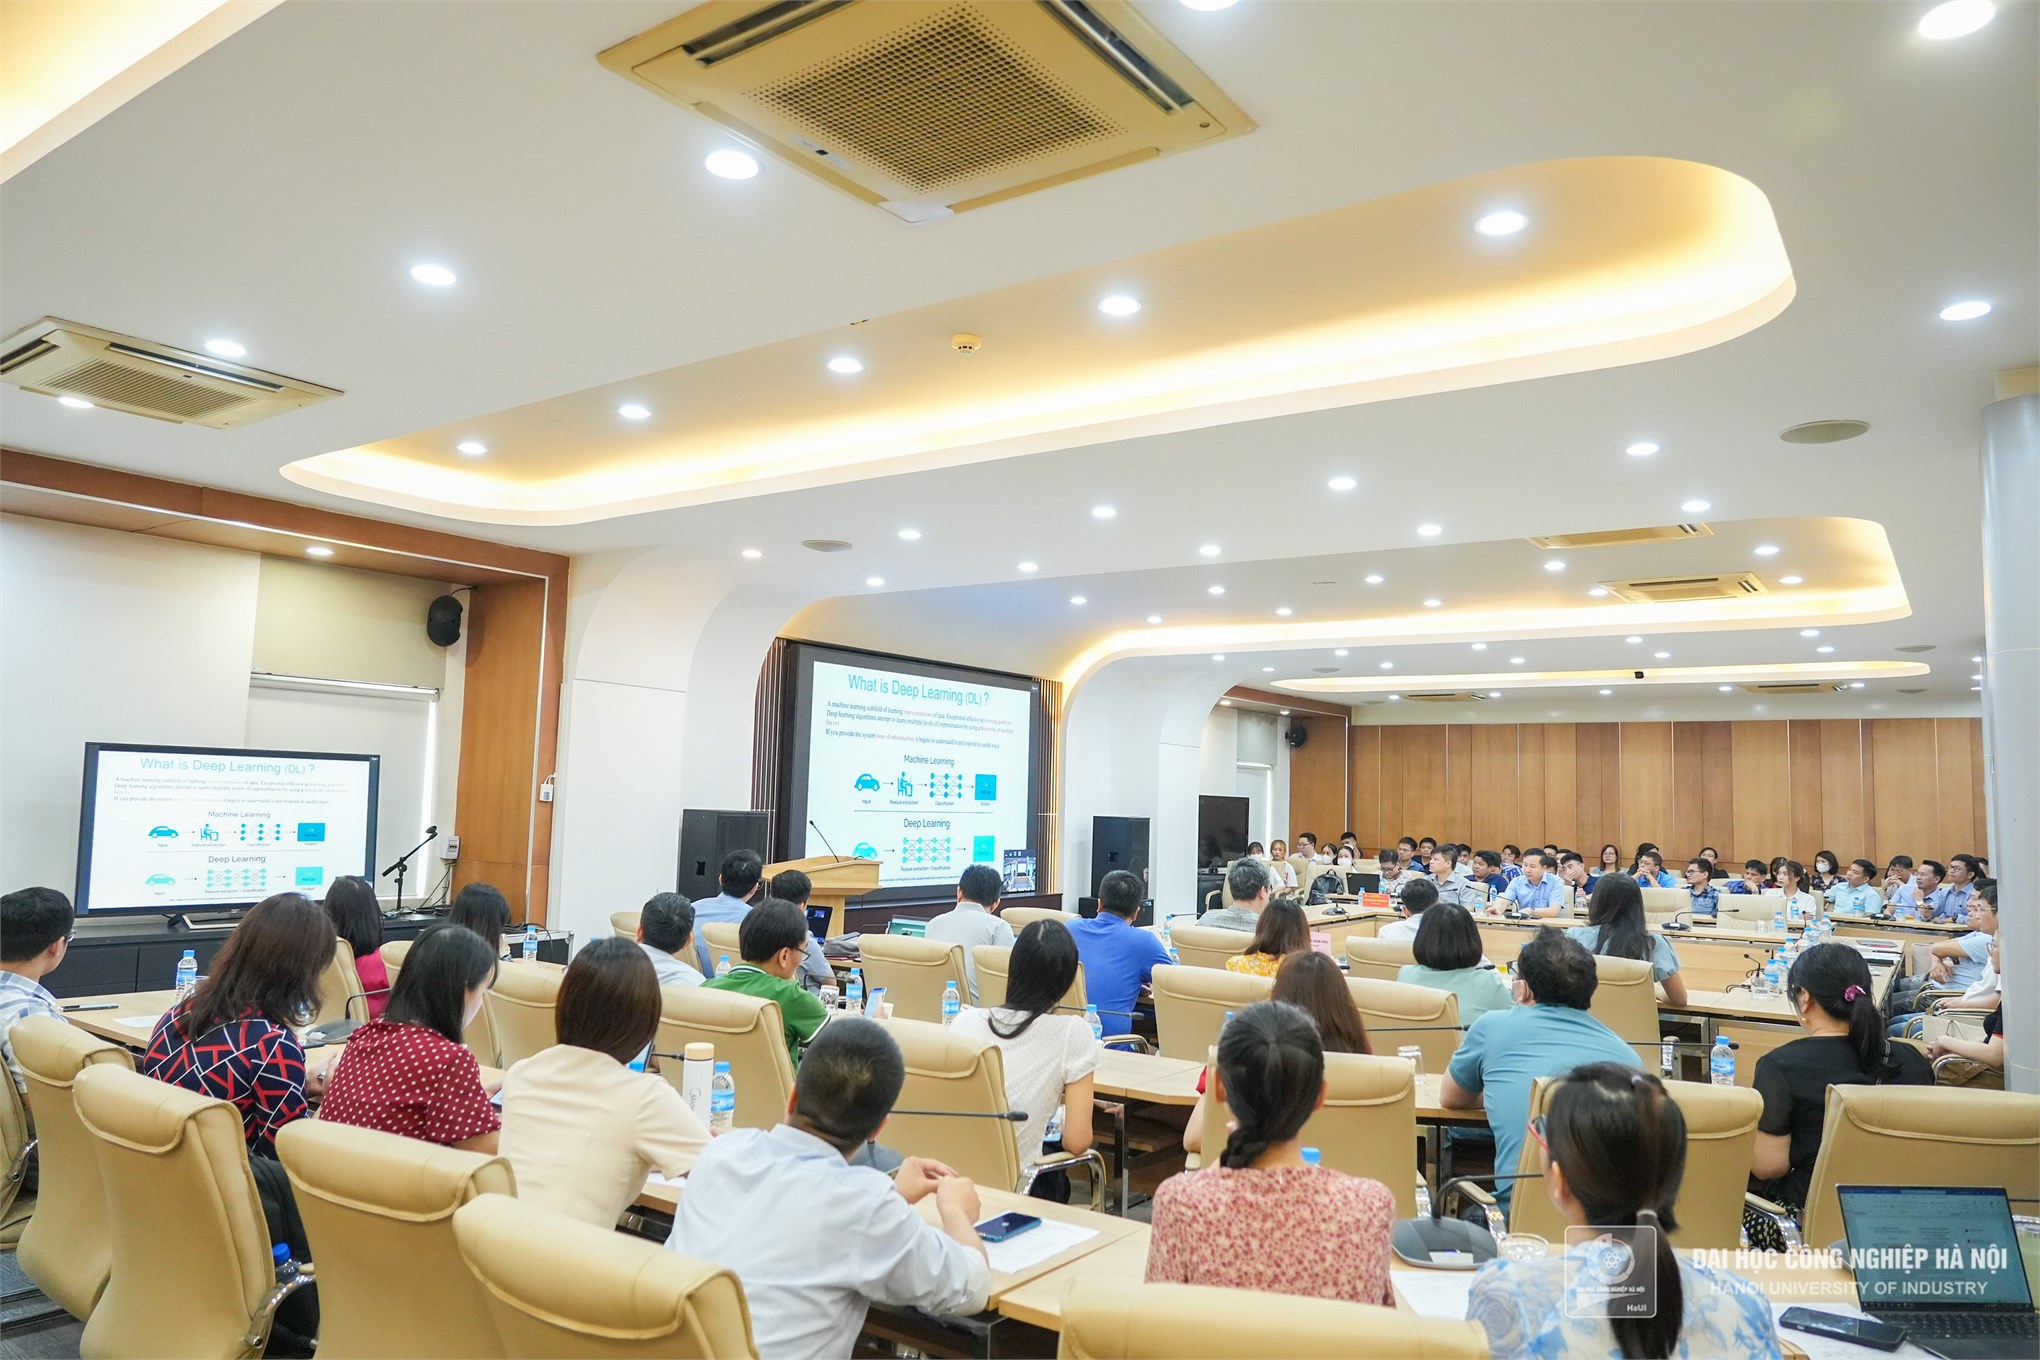 Seminar: ChatGPT and AI technology in education and training